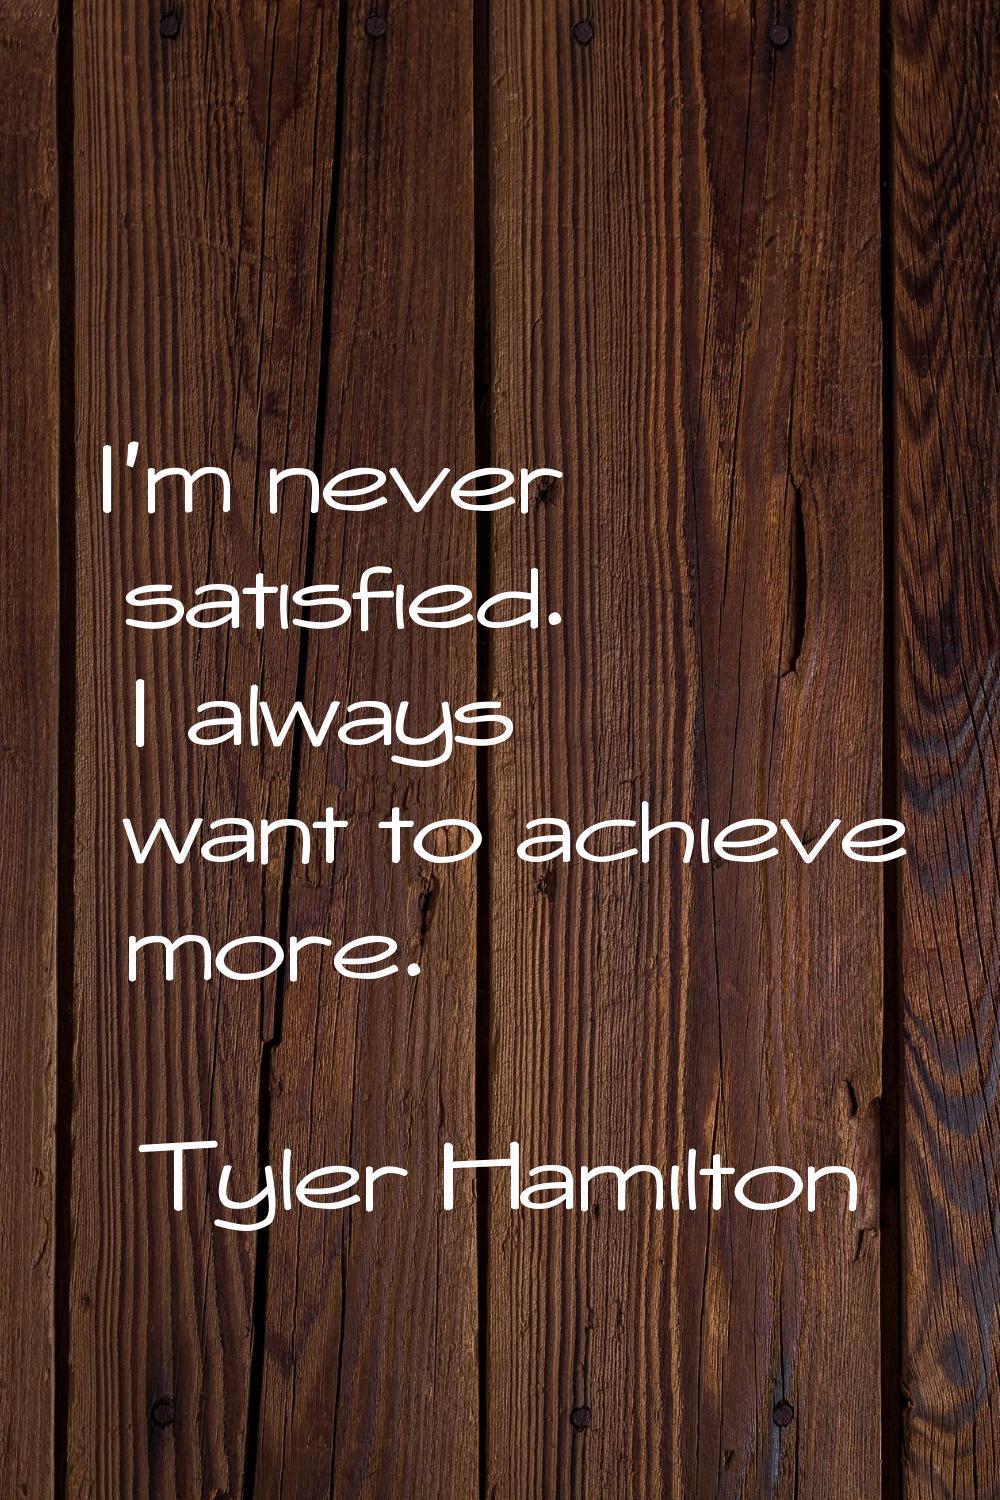 I'm never satisfied. I always want to achieve more.